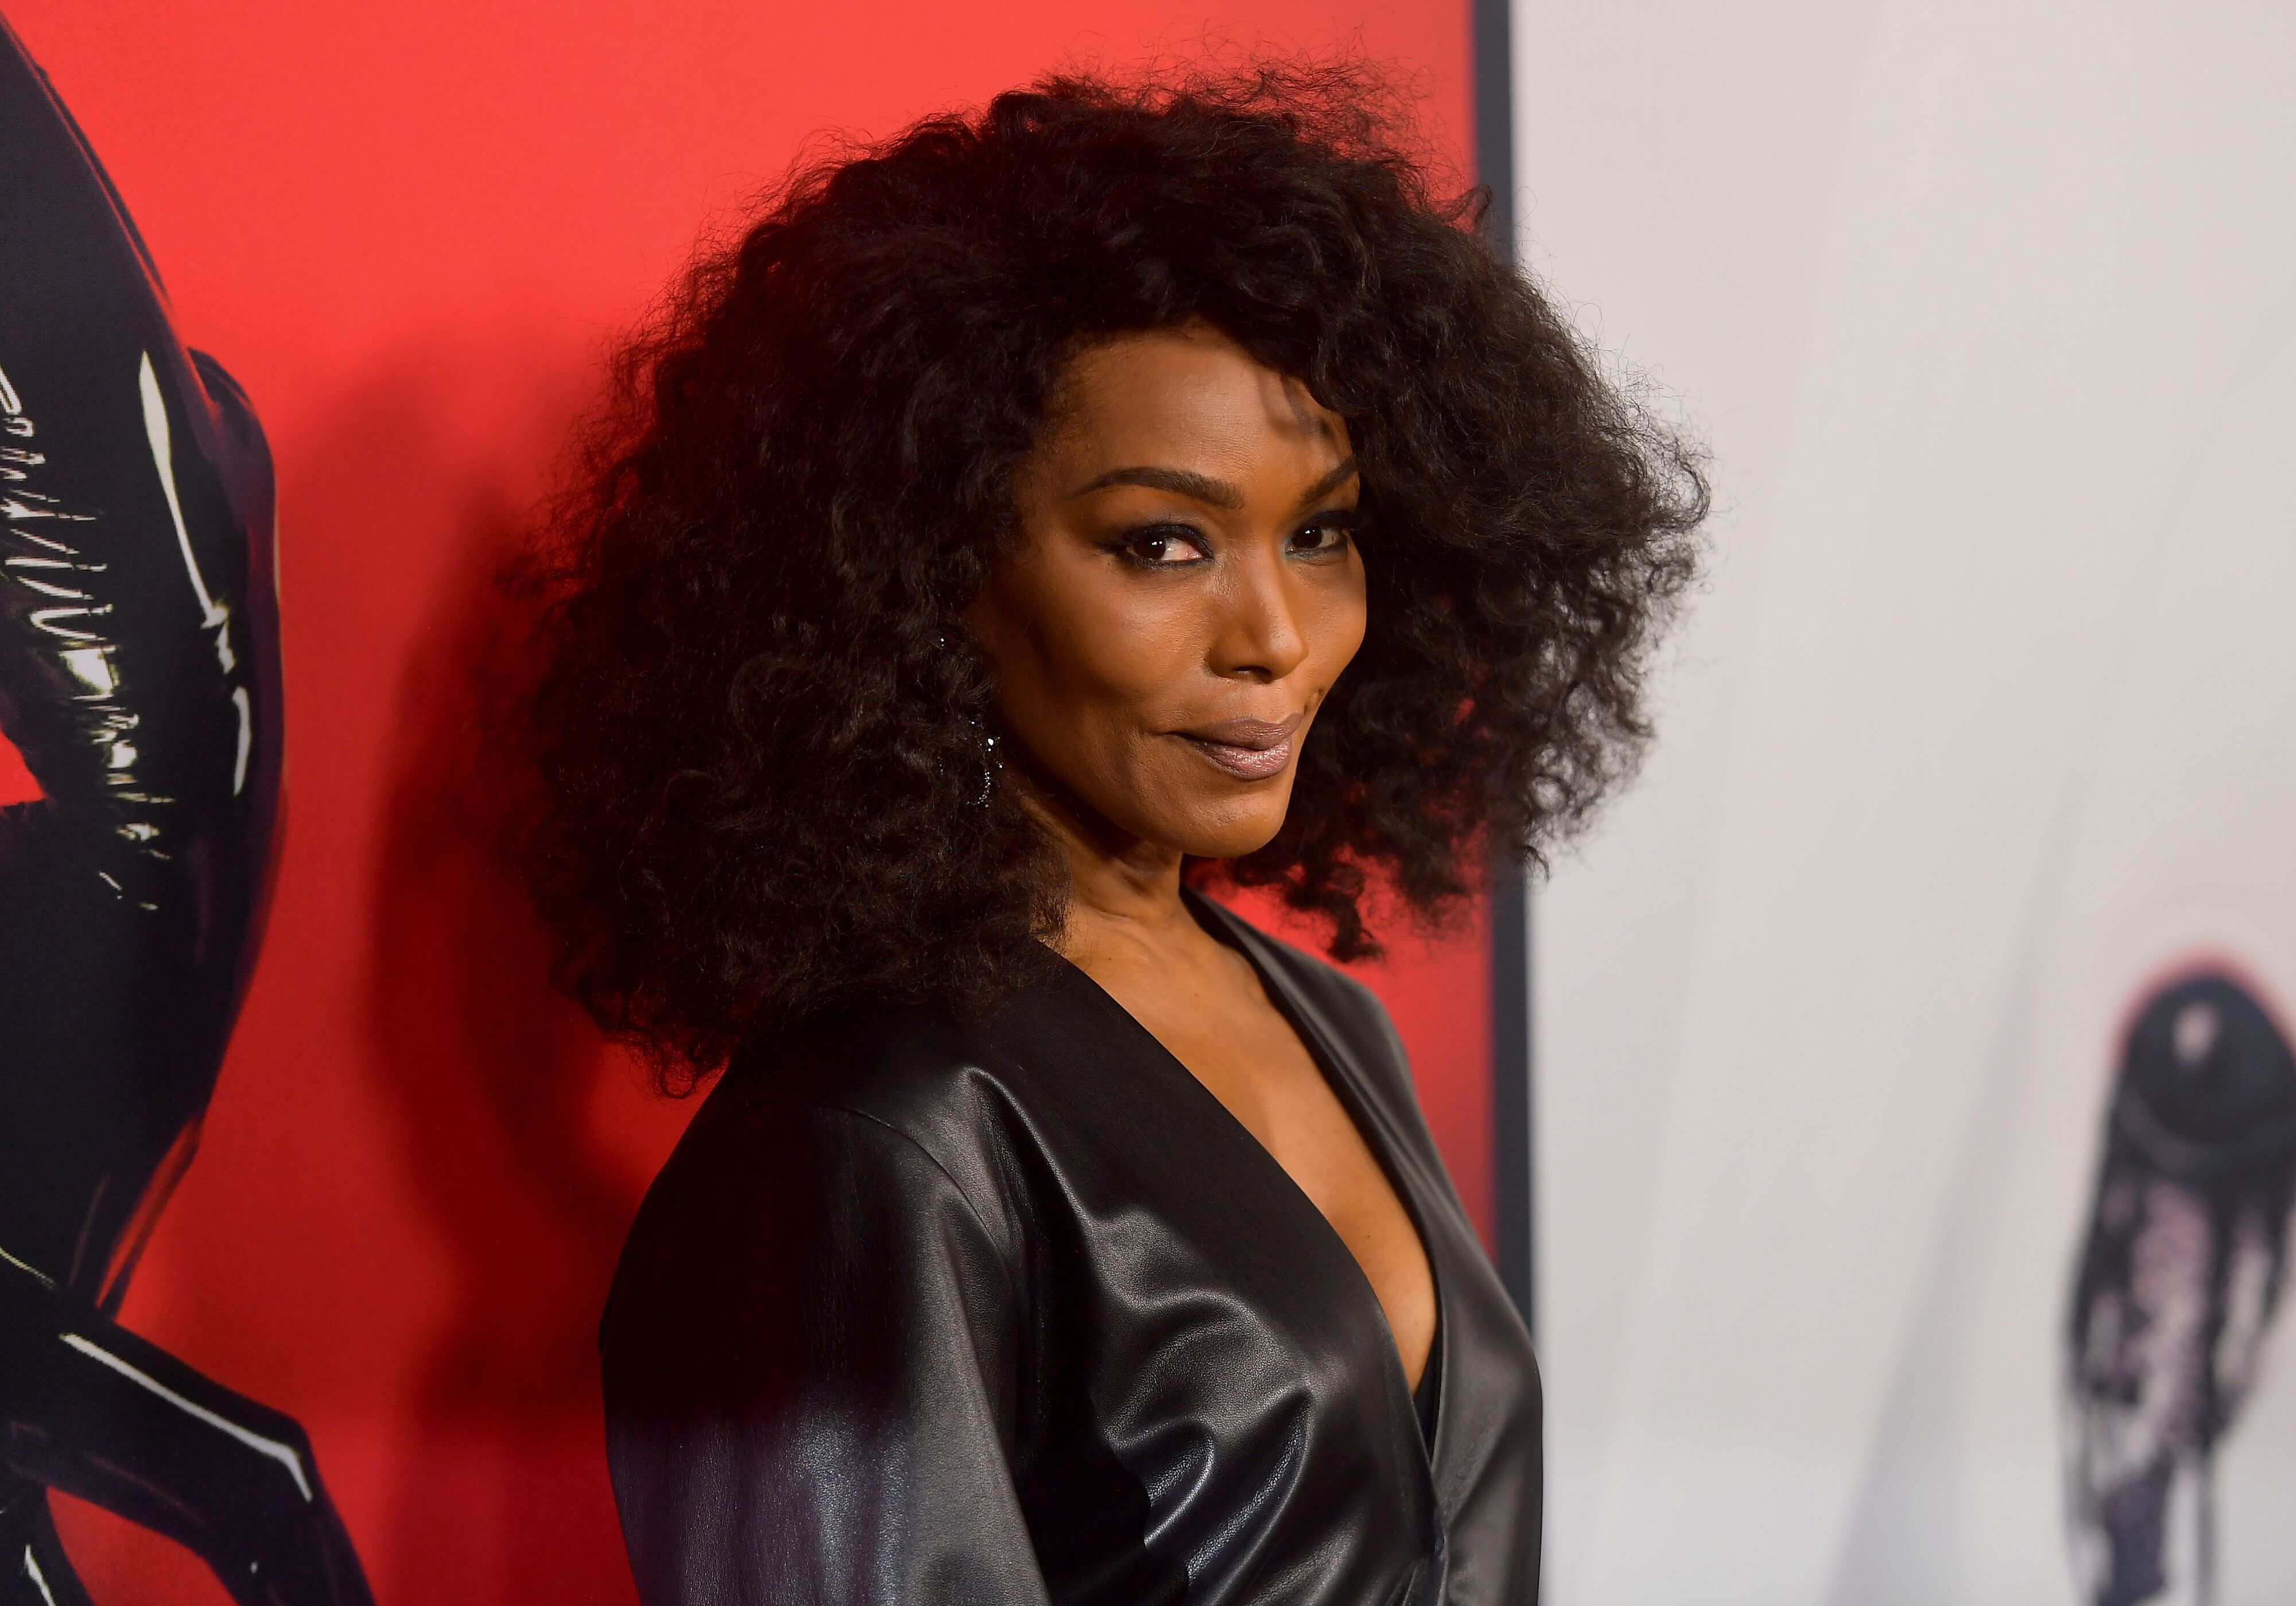 Angela Bassett at FX's "American Horror Story" 100th Episode Celebration at Hollywood Forever in October 2019. | Photo: Getty Images